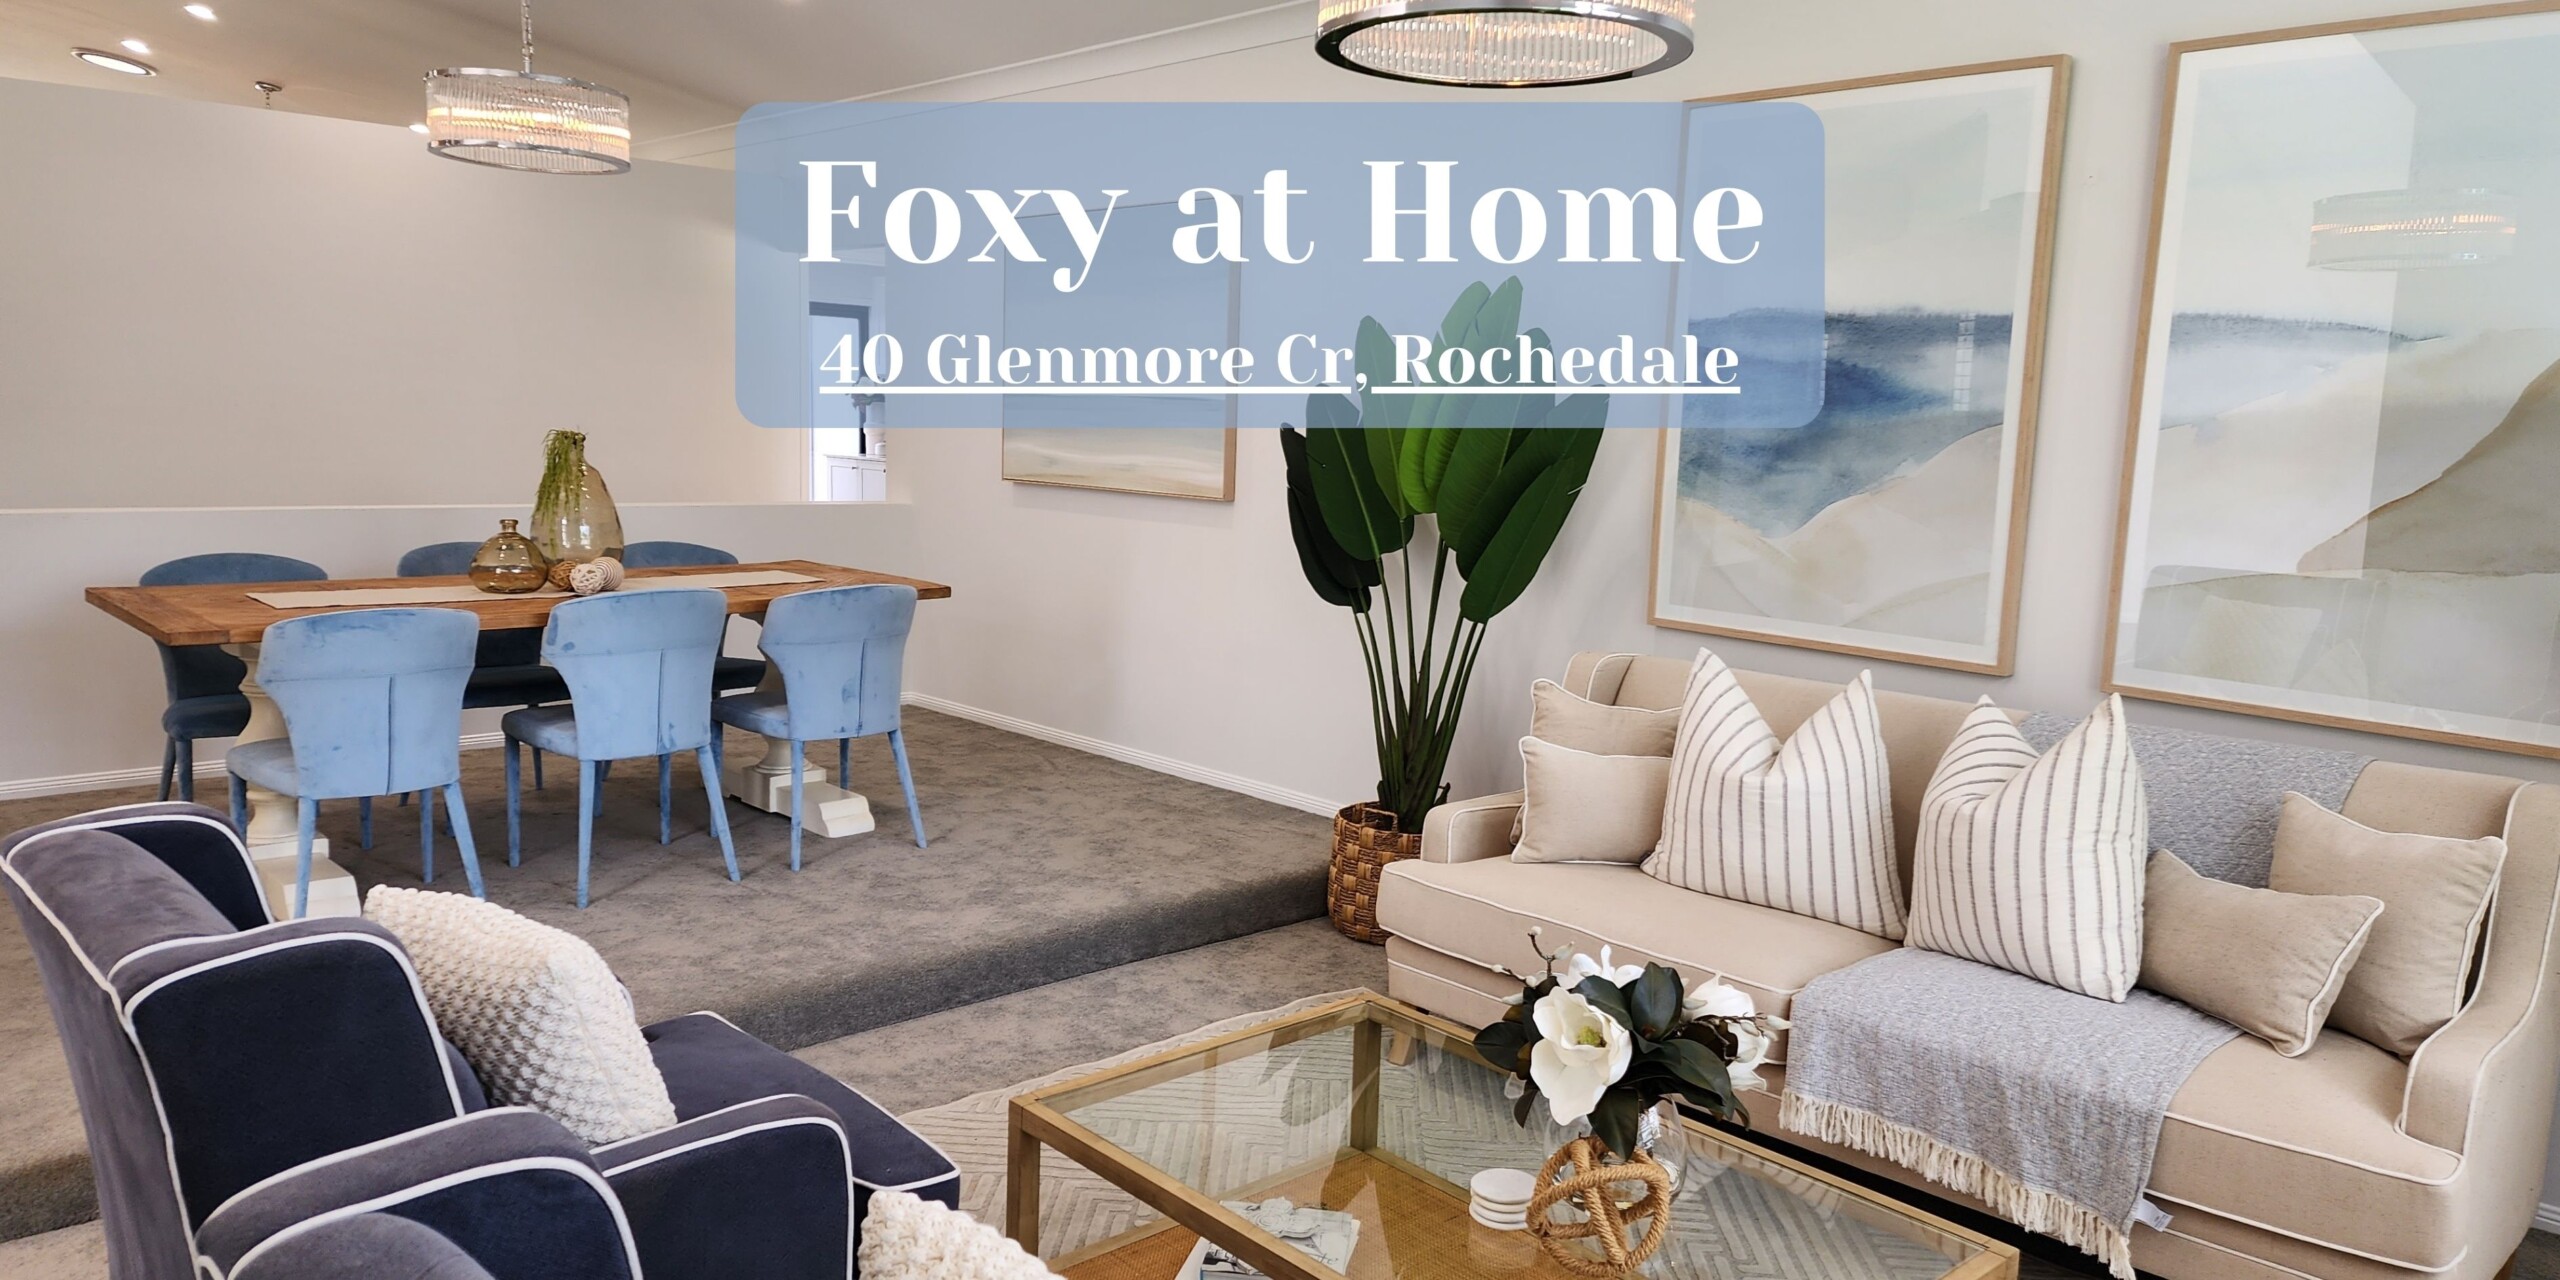 Foxy at Home Title Image